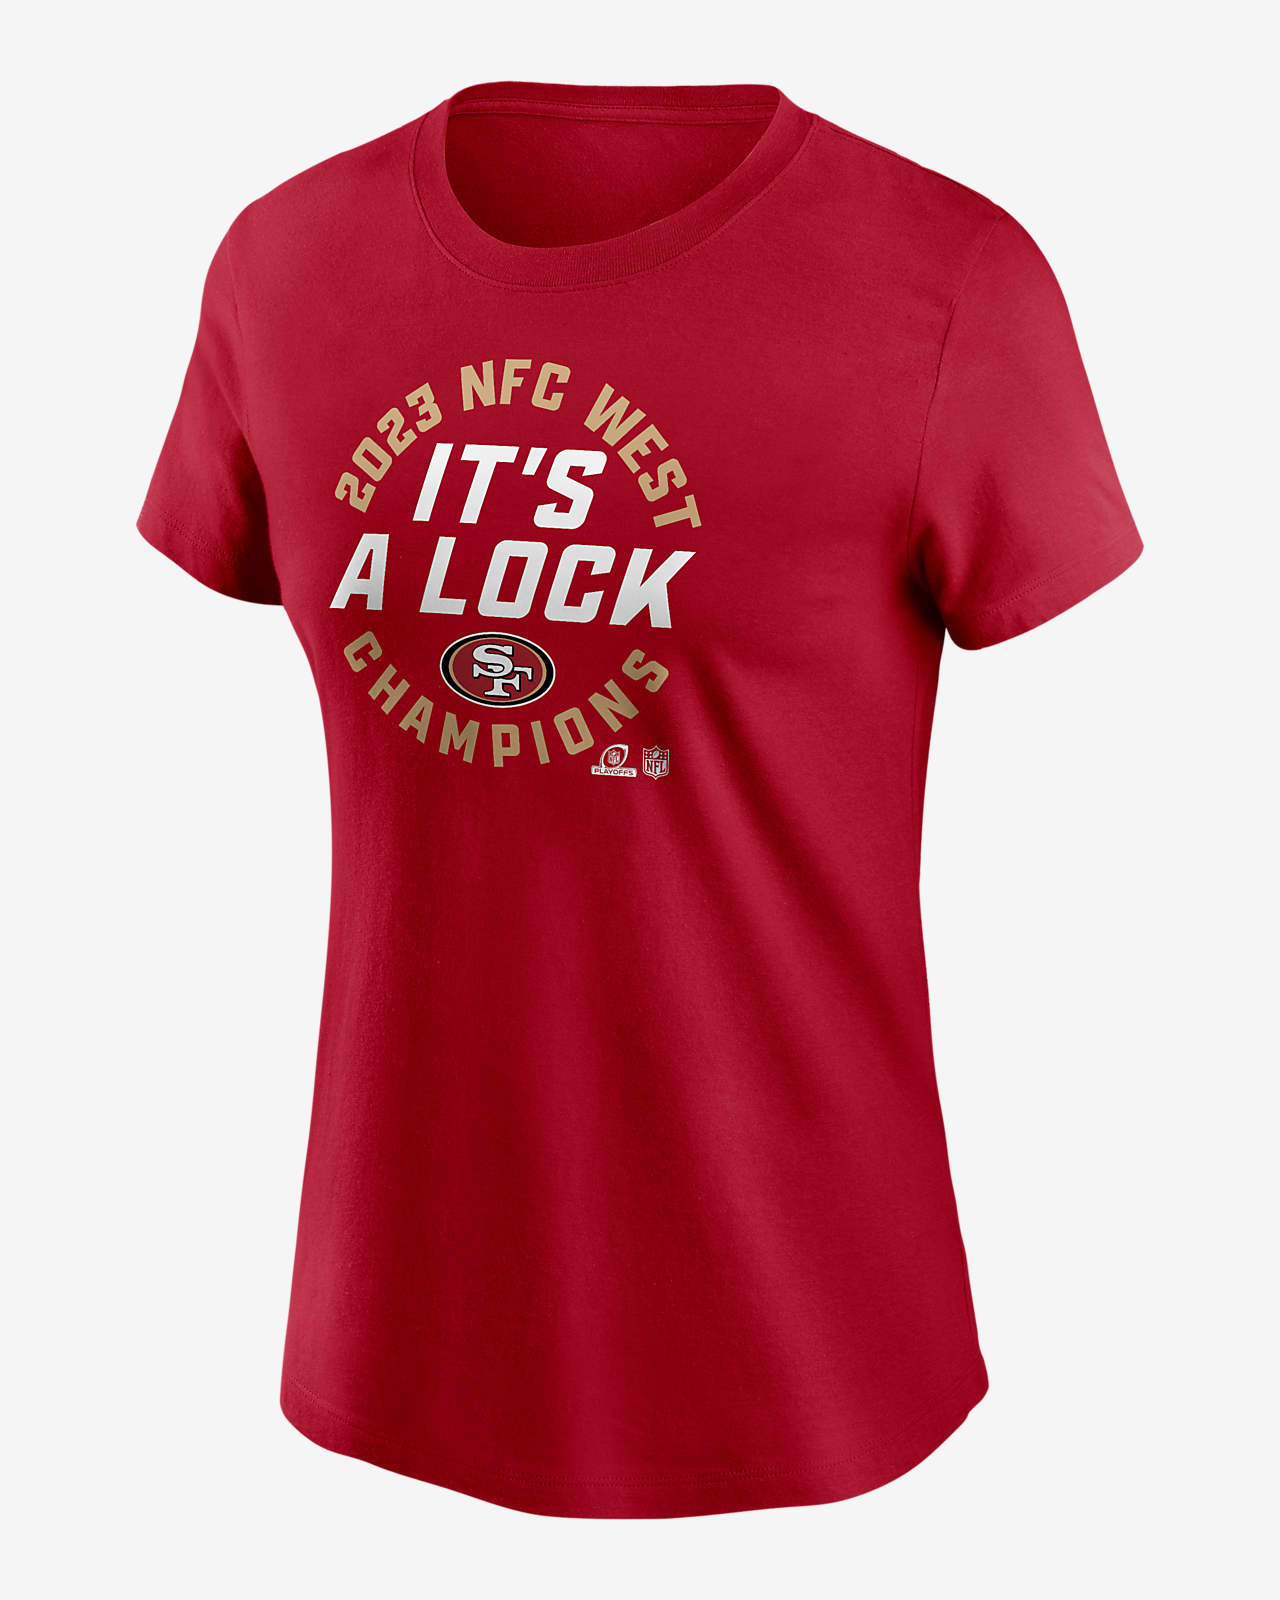 https://static.nike.com/a/images/t_PDP_1280_v1/f_auto,q_auto:eco/45a1c729-6ff0-4193-b4fd-a0bad1d975e6/san-francisco-49ers-2023-nfc-west-champions-trophy-collection-womens-t-shirt-Ng3xjB.png